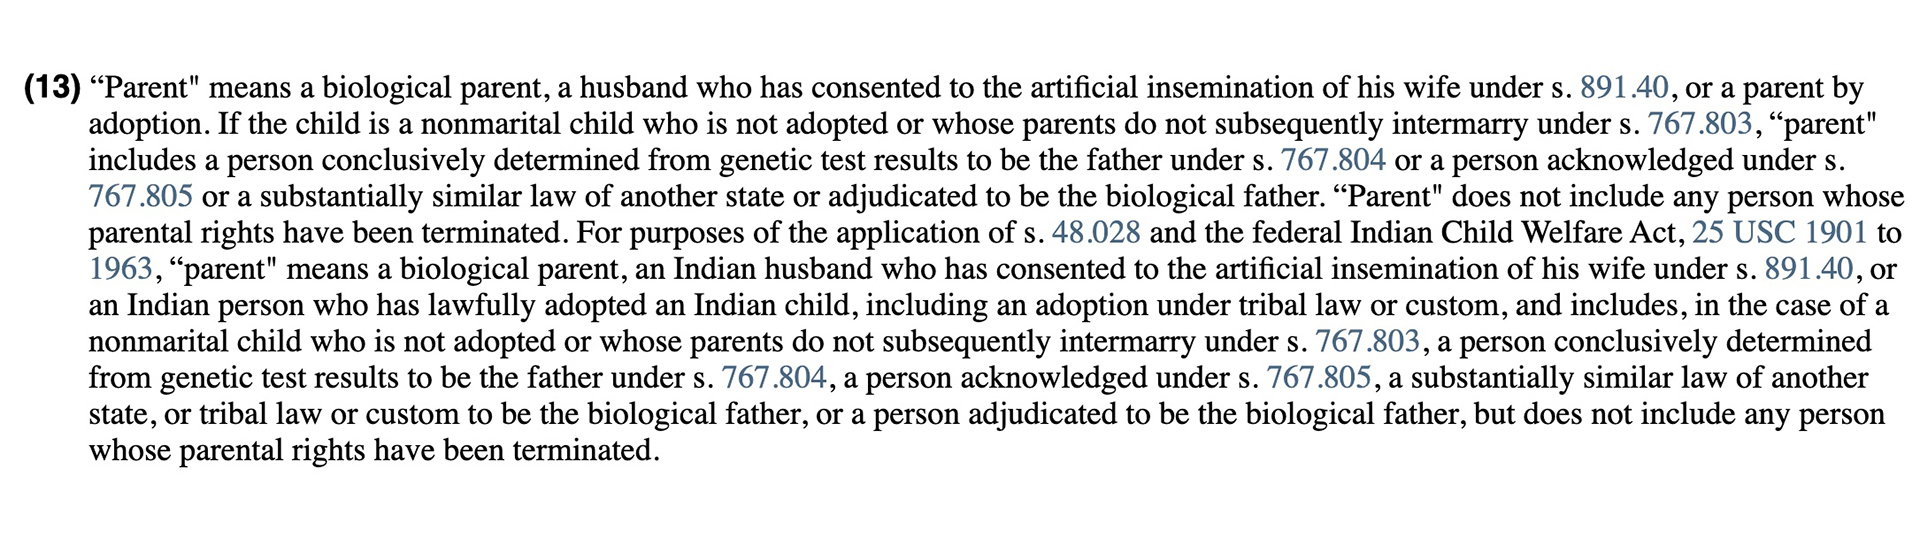 A screenshot of Wisconsin Statues begins with a line that reads: "'Parent' means a biological parent, a husband who has consented to the artificial insemination of his wife under s. 891.40, or a parent by adoption."